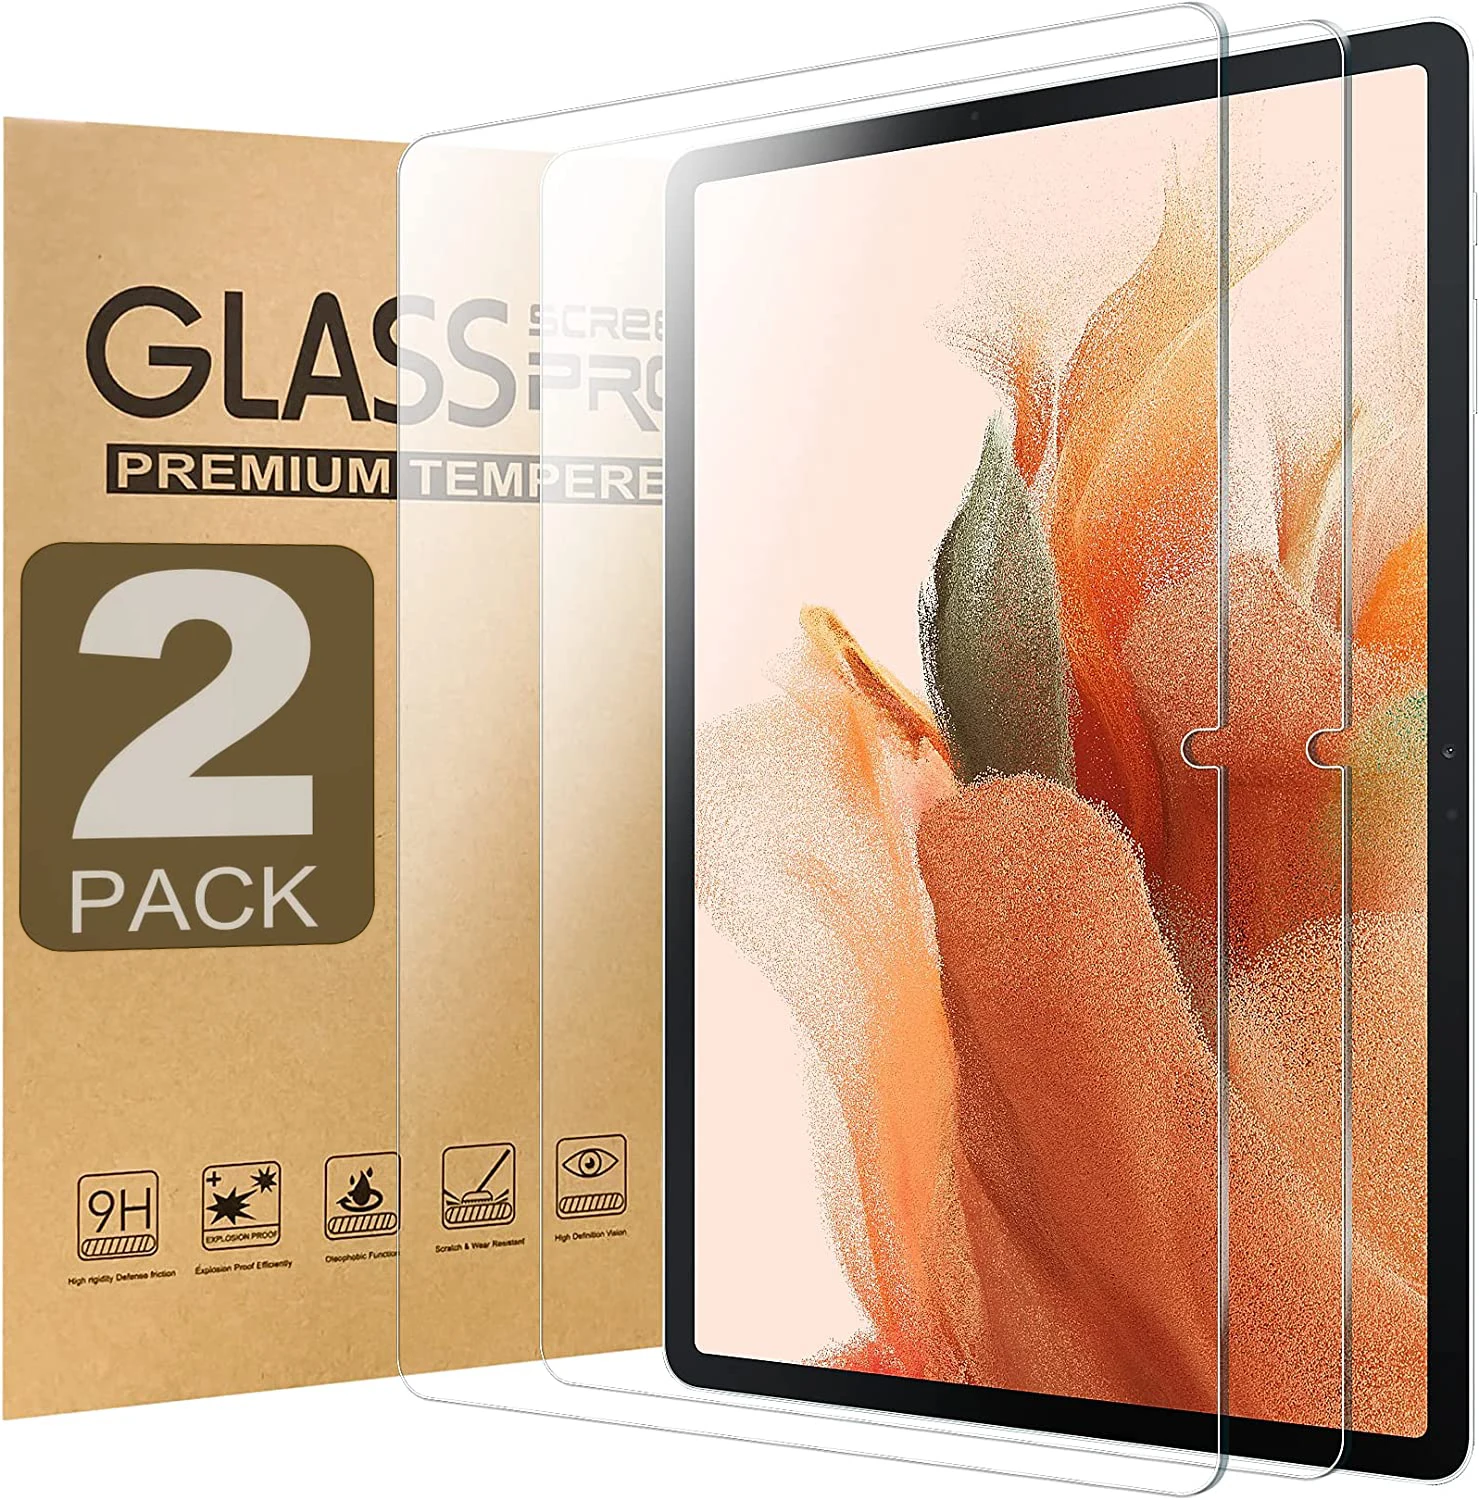 2pcs Screen Protector Tempered Glass For Samsung Galaxy S7 FE 12.4'' 2021 s7 fe SM-T730 SM-T735 SM-T736B HD Clear Tablet Film 2 packs tempered glass for samsung galaxy tab s7 fe 2021 12 4 sm t730 t736b full coverage screen protector film